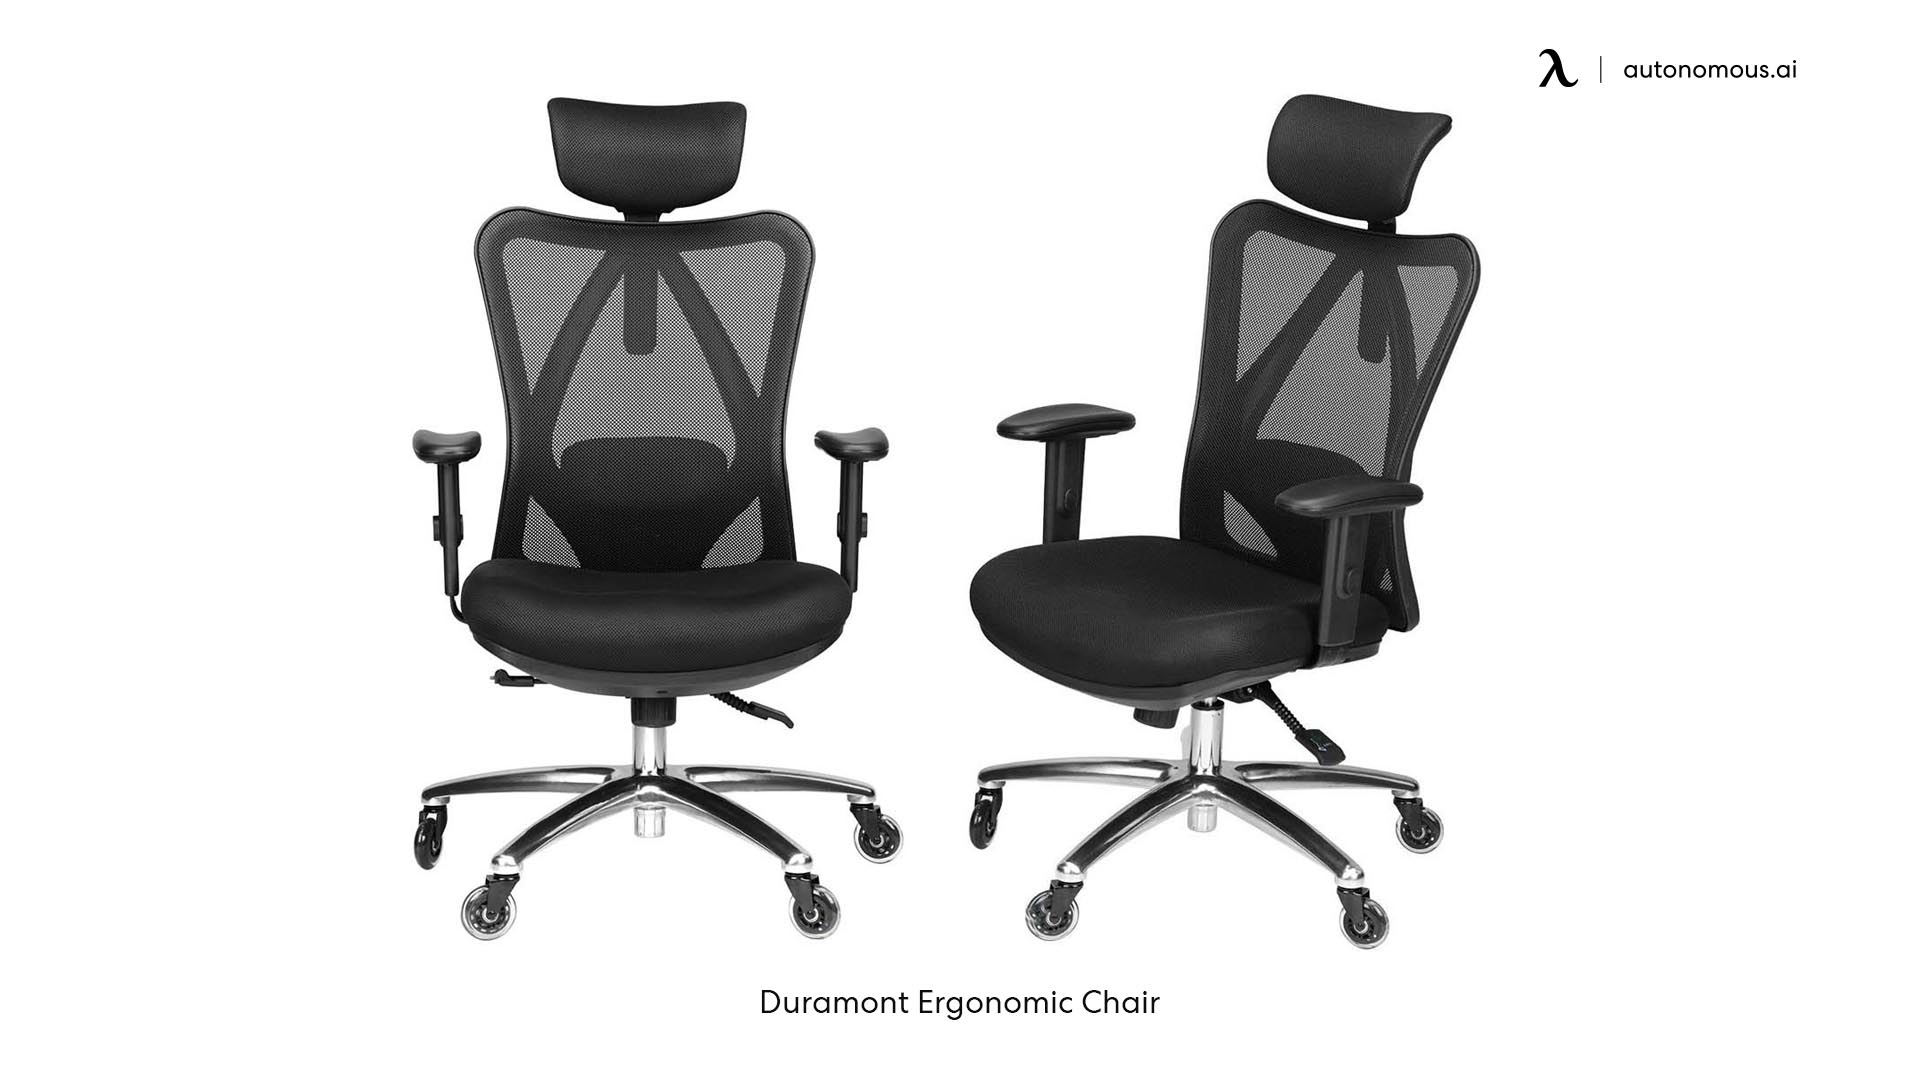 Duramont Ergonomic affordable office chairs